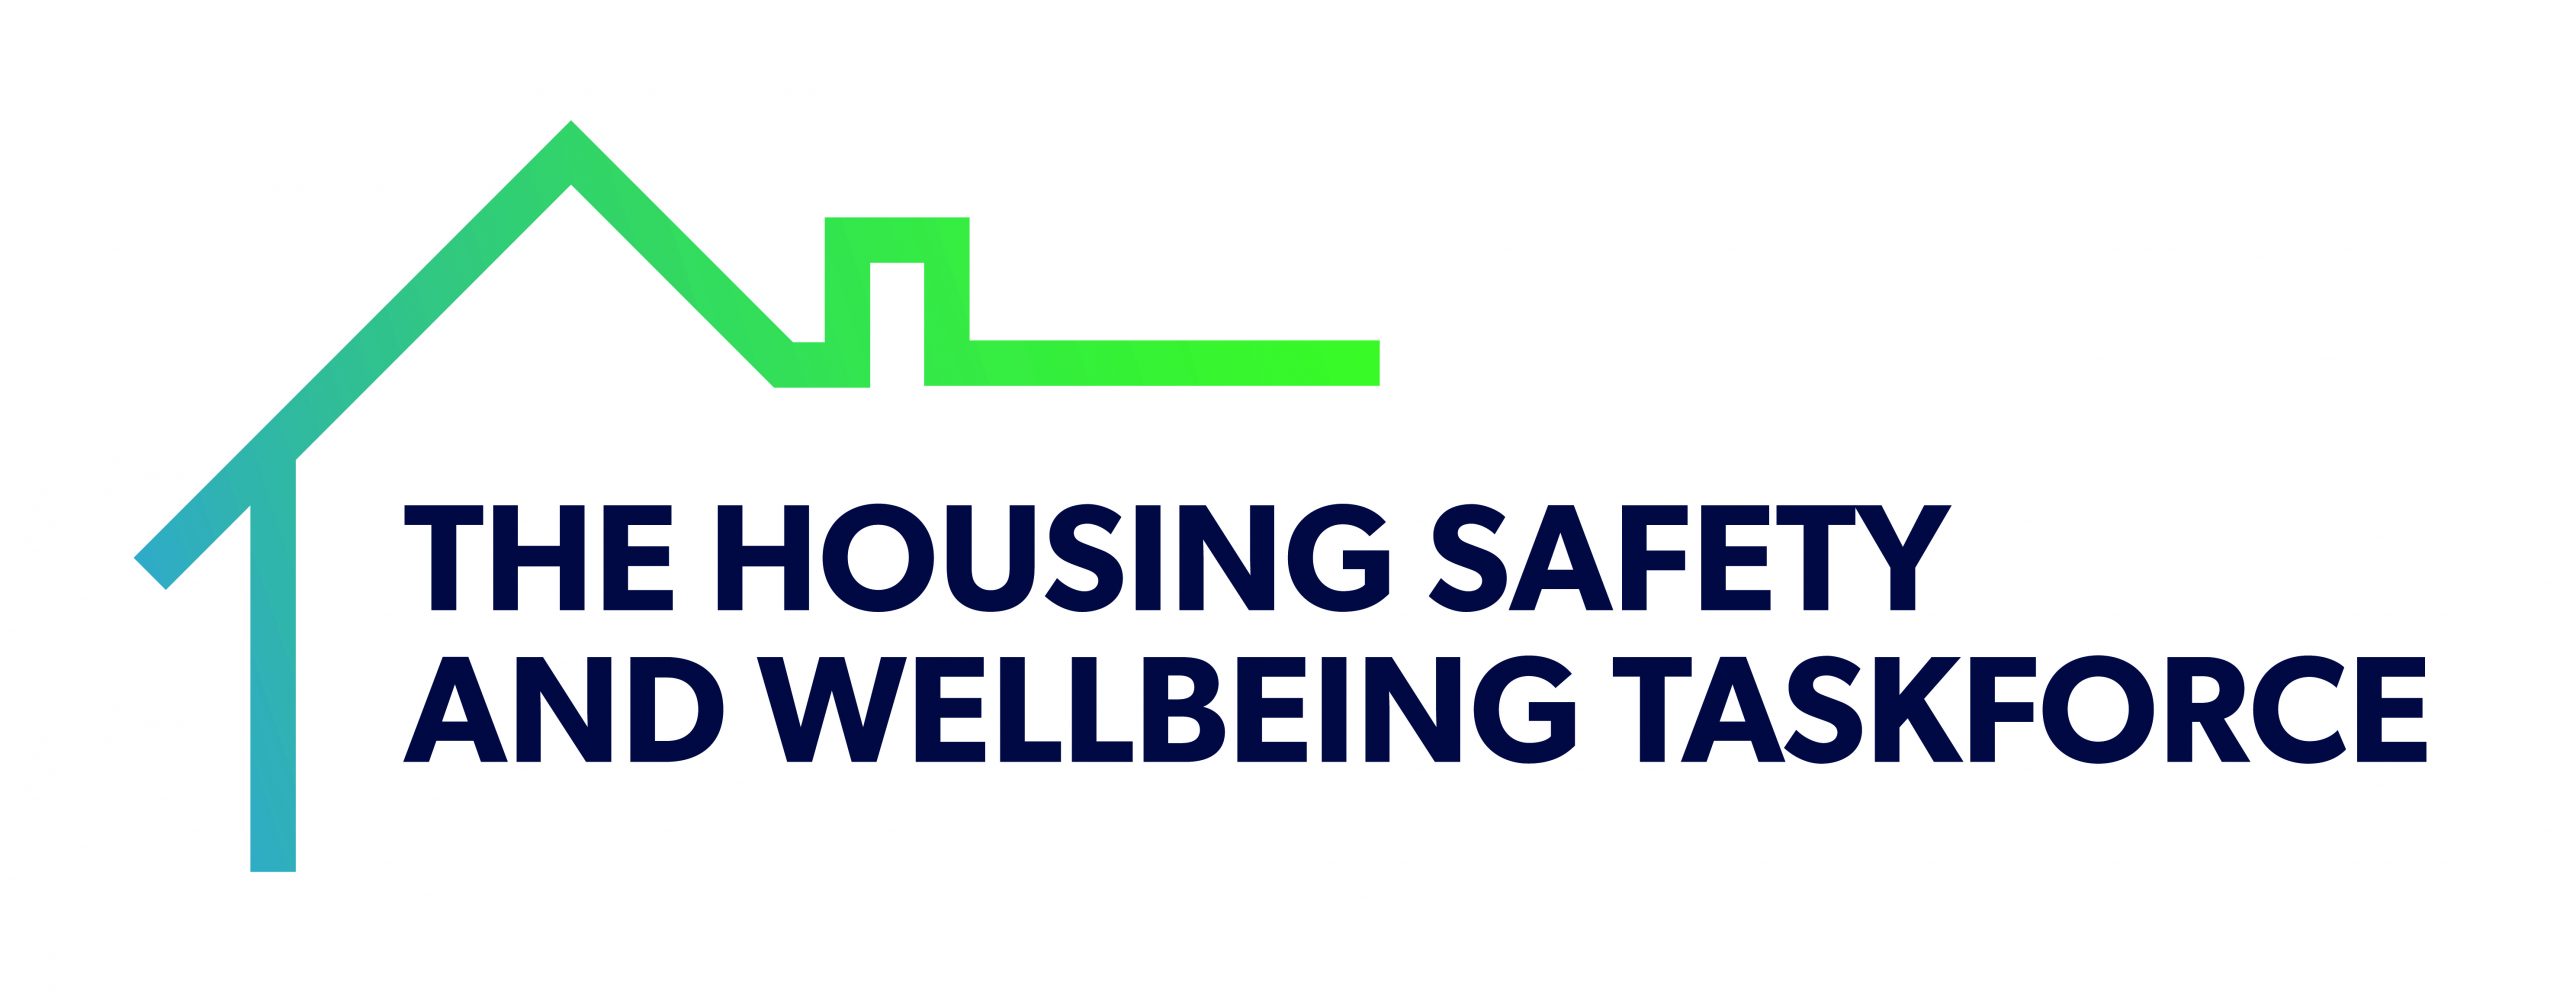 What Is the Housing Safety and Wellbeing Taskforce?